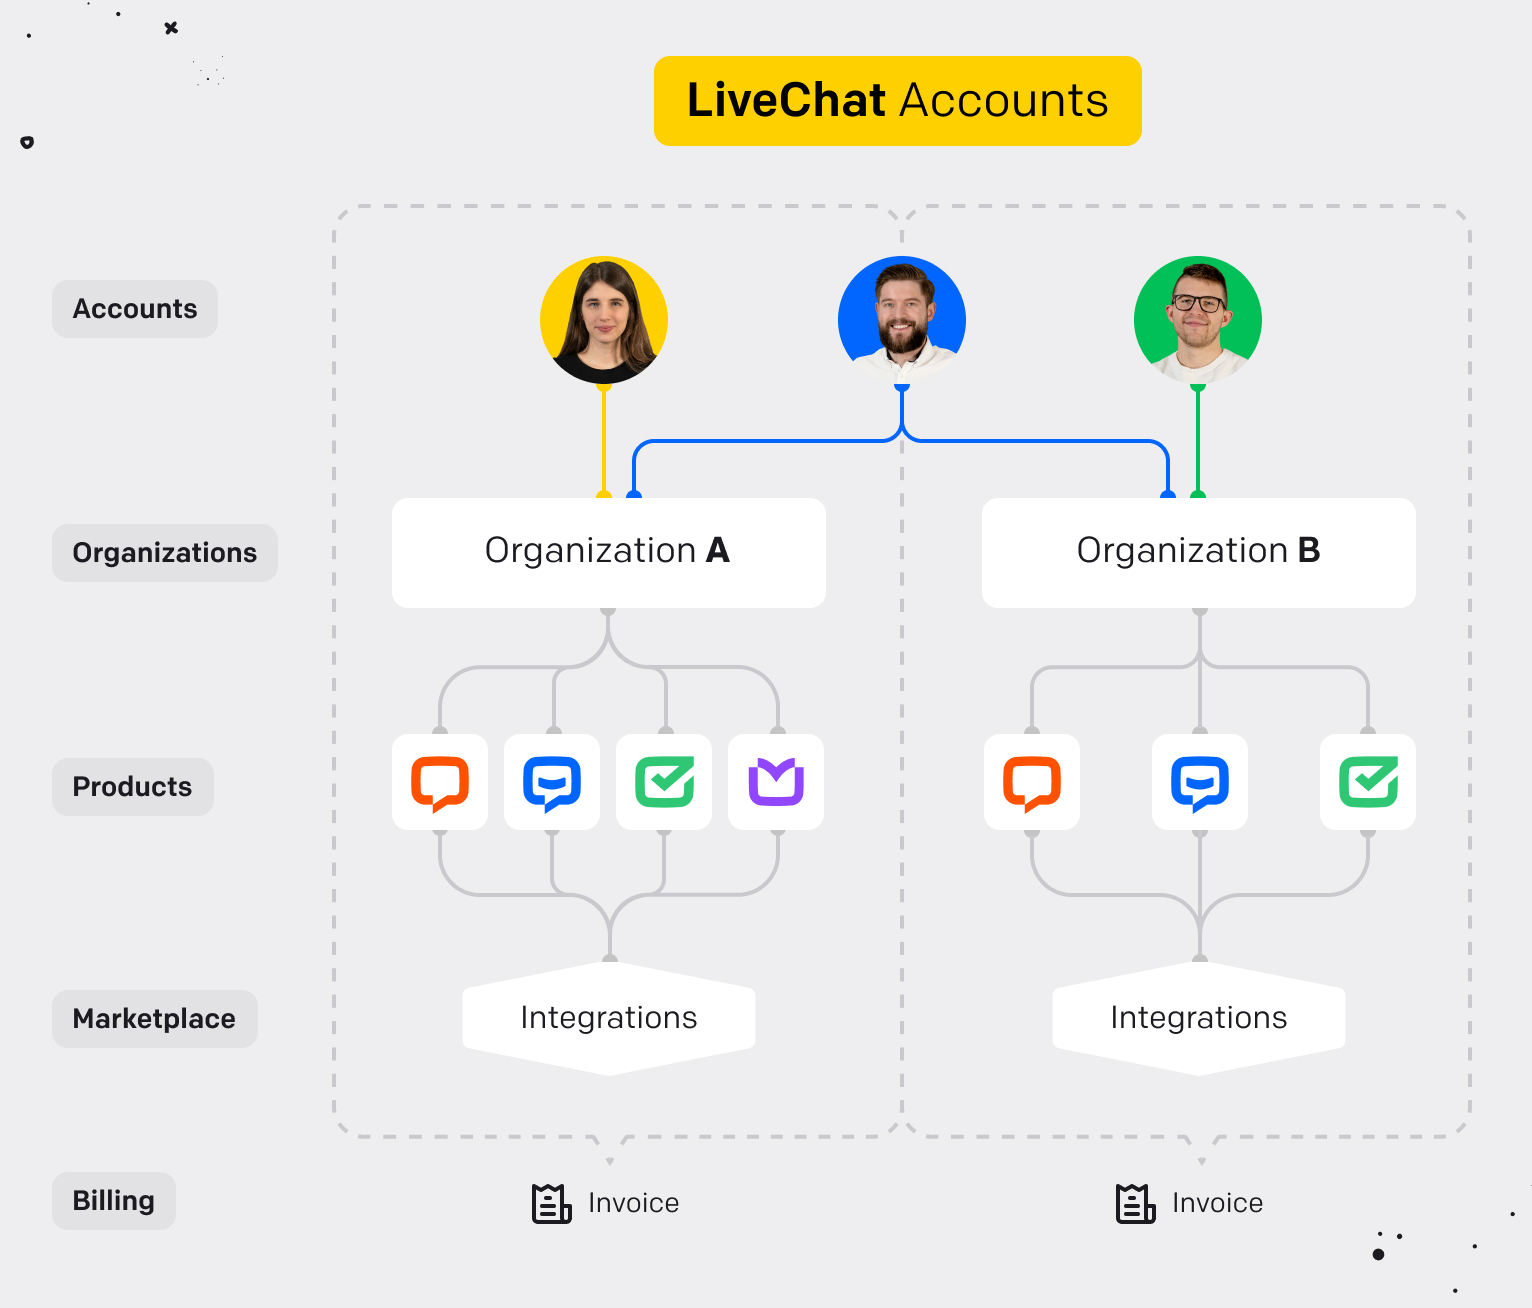 Example of organizations in LiveChat Accounts.